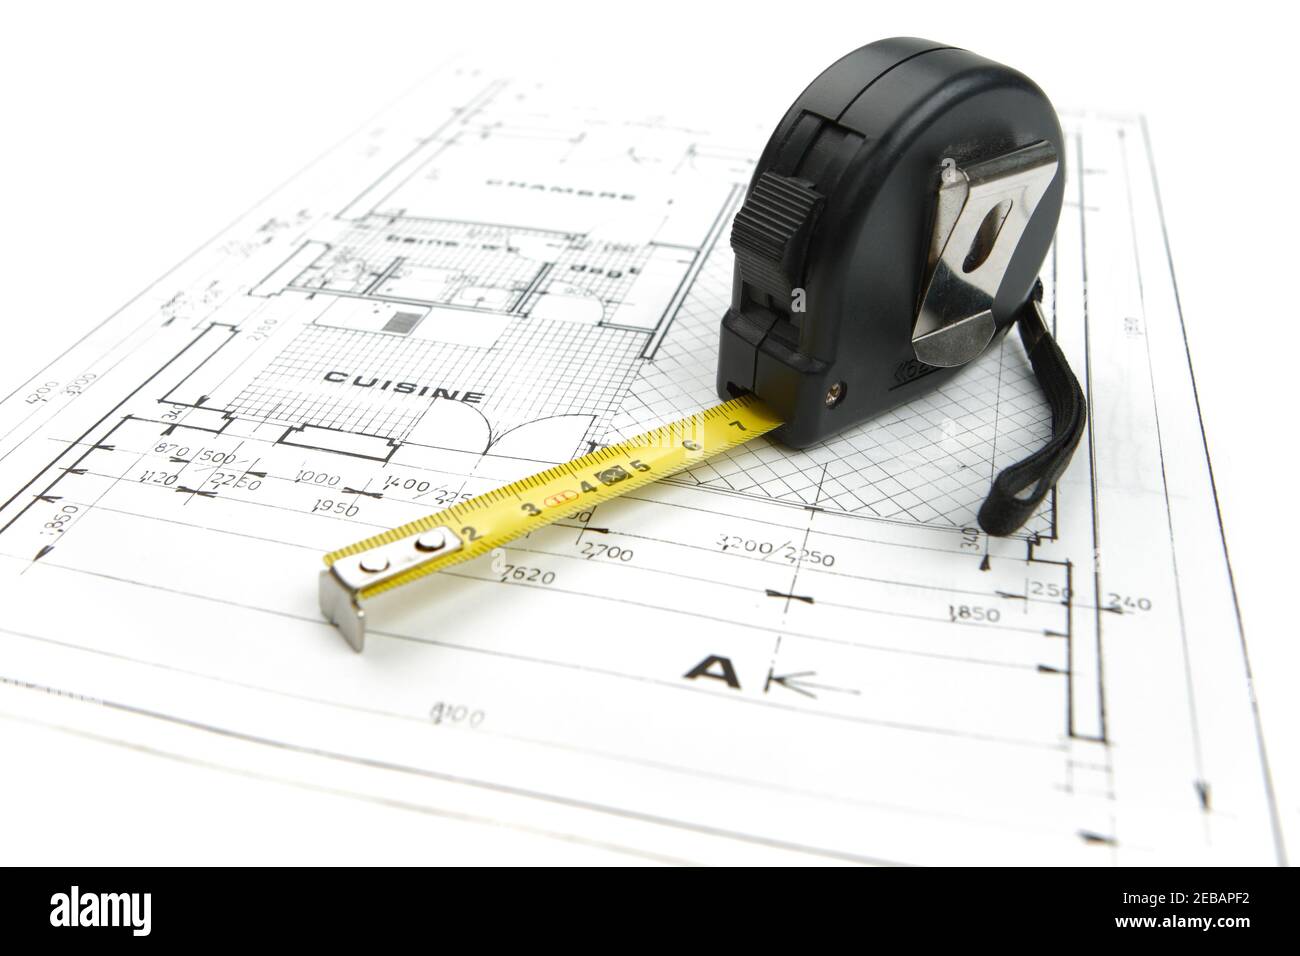 Measuring tape close up on a construction plan isolated on a white background Stock Photo